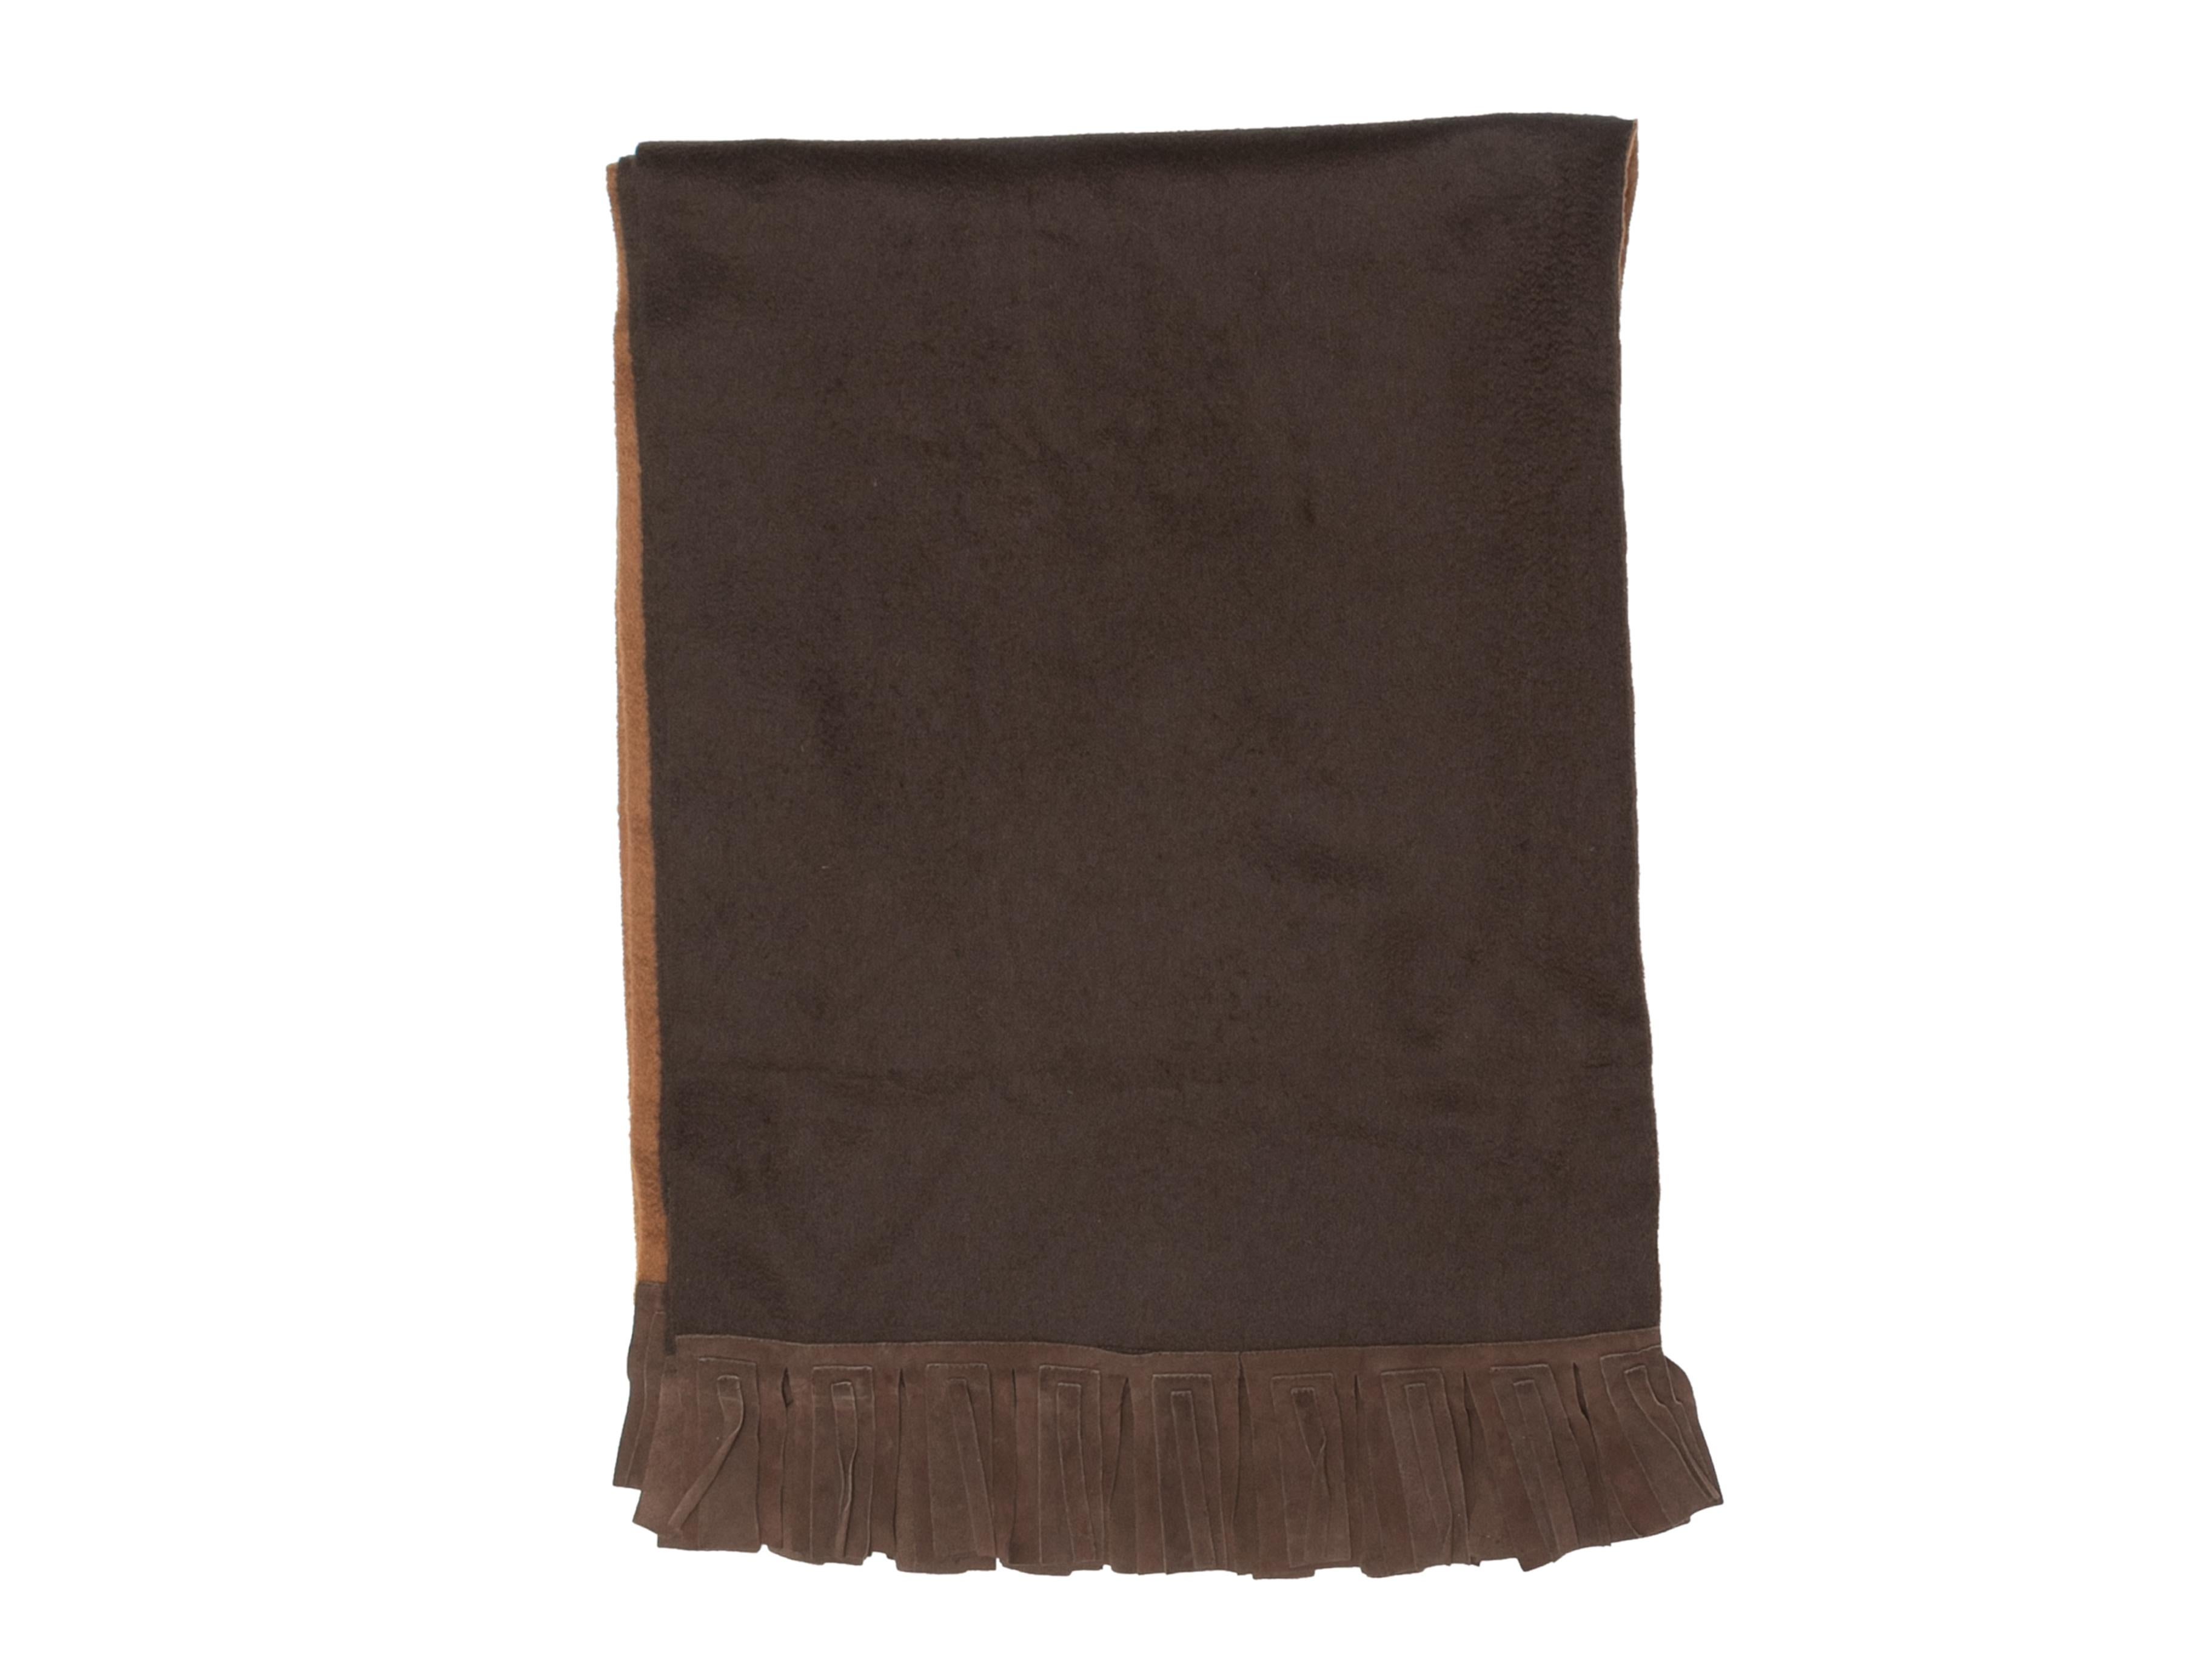 Brown and tan cashmere and suede shawl by Salvatore Ferragamo. 17.5